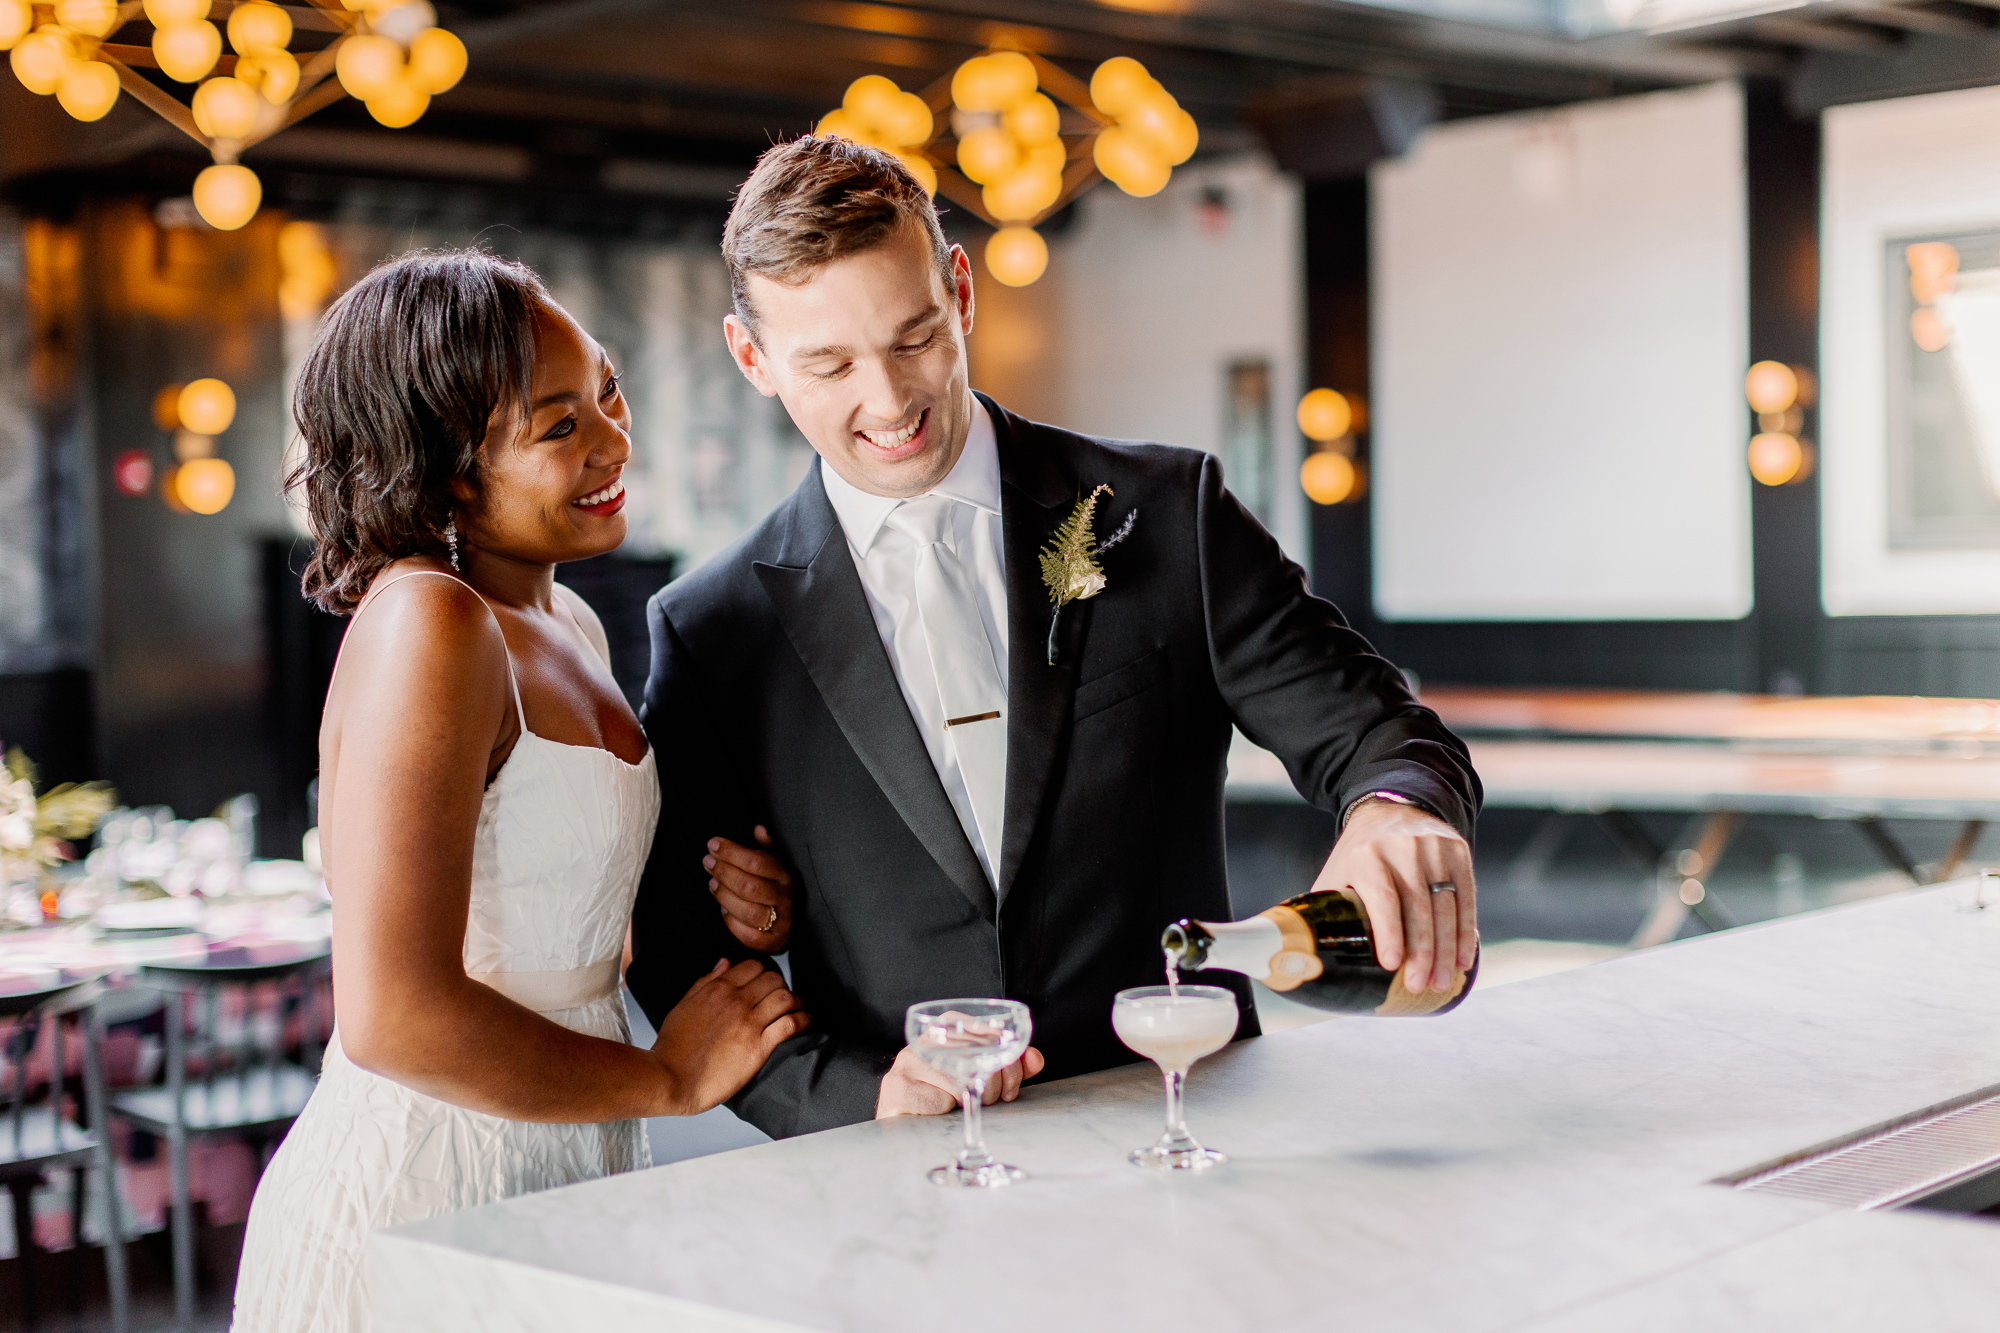 How To Have A Modern Speakeasy Style Wedding